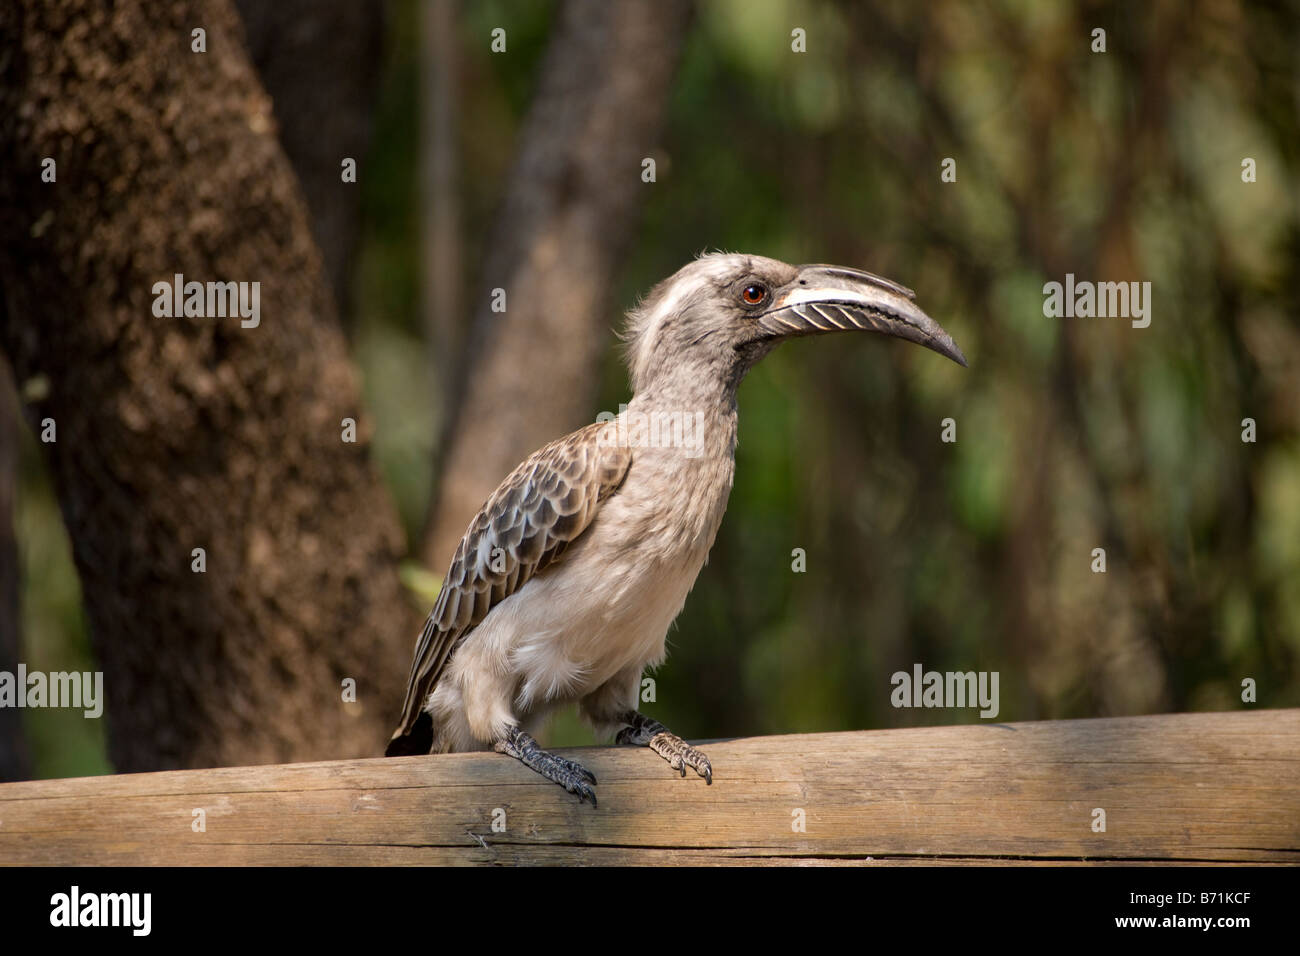 African Grey Hornbill Perched on a Railing, Lianshulu, Namibia Stock Photo